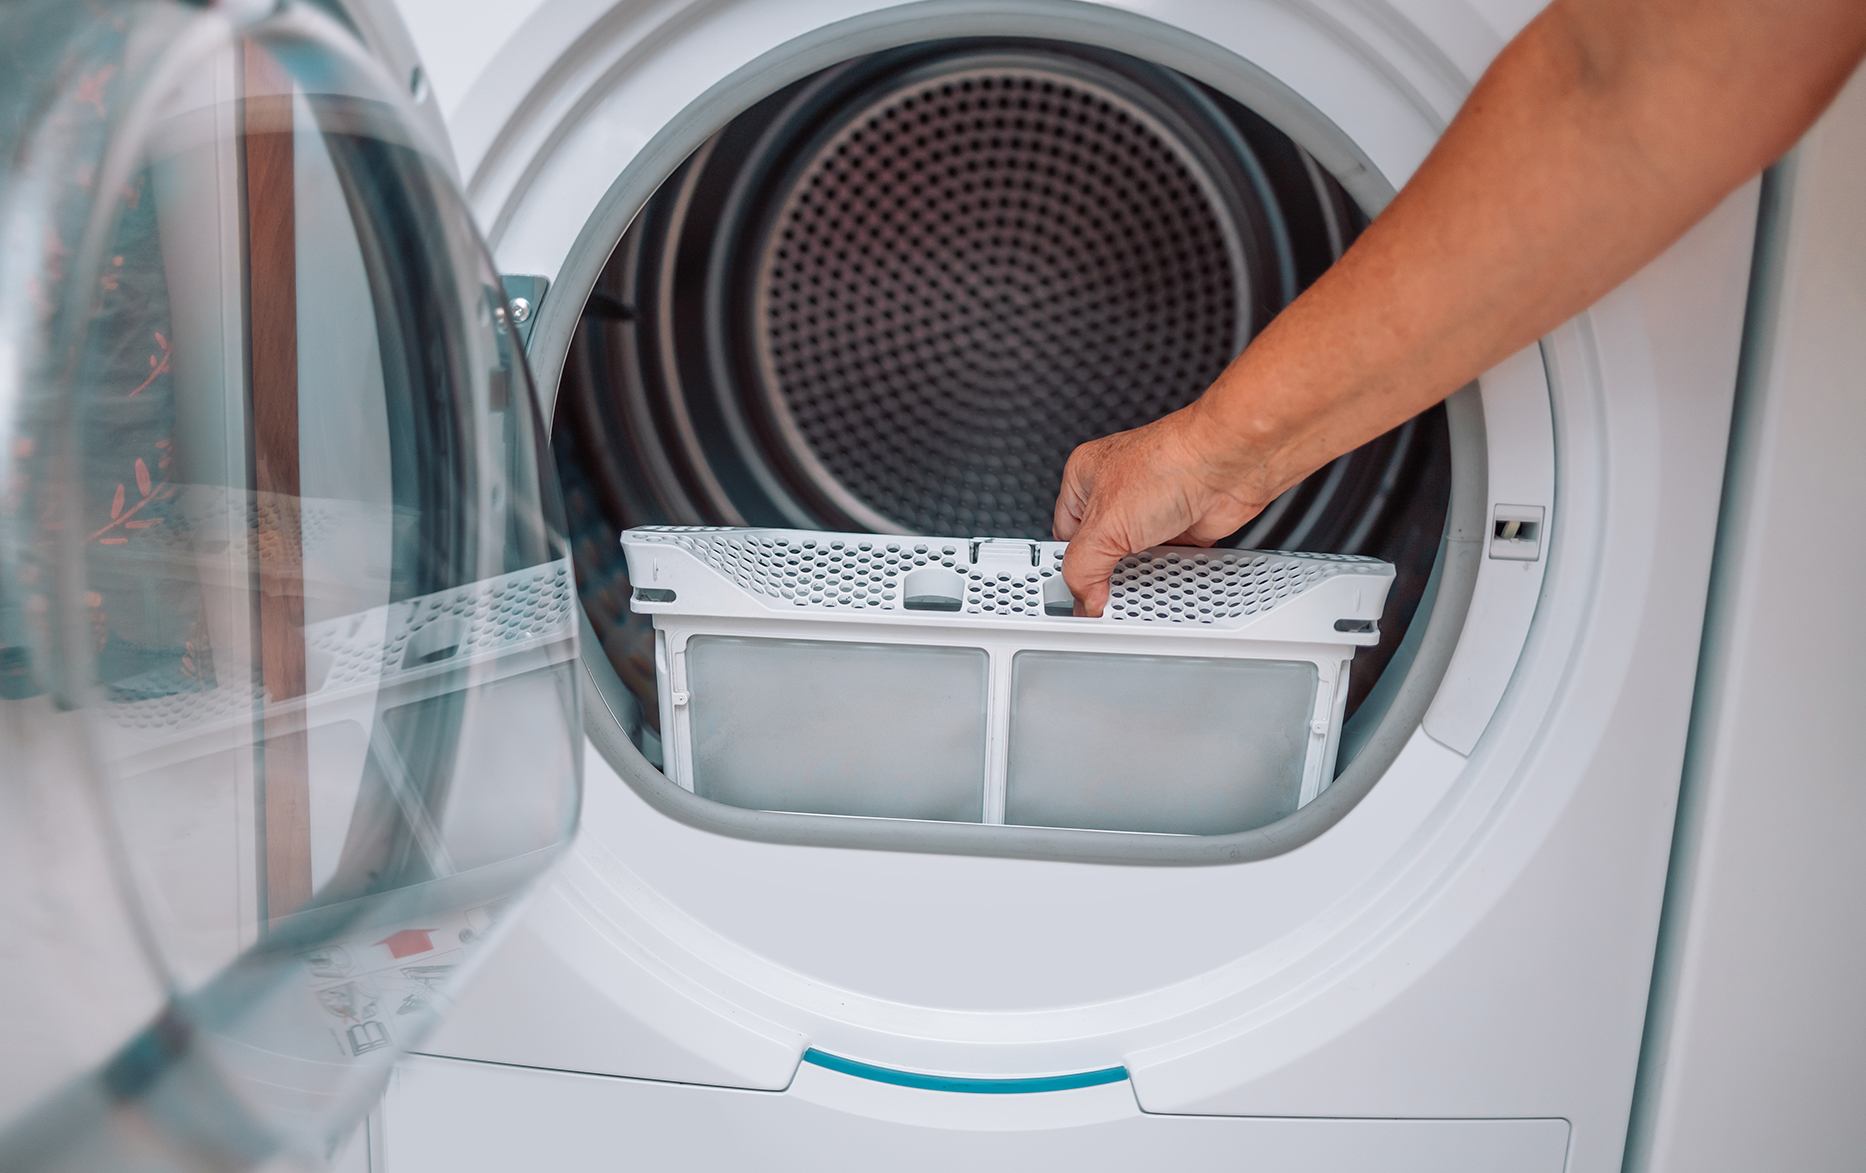 How To Clean Dryer Filter